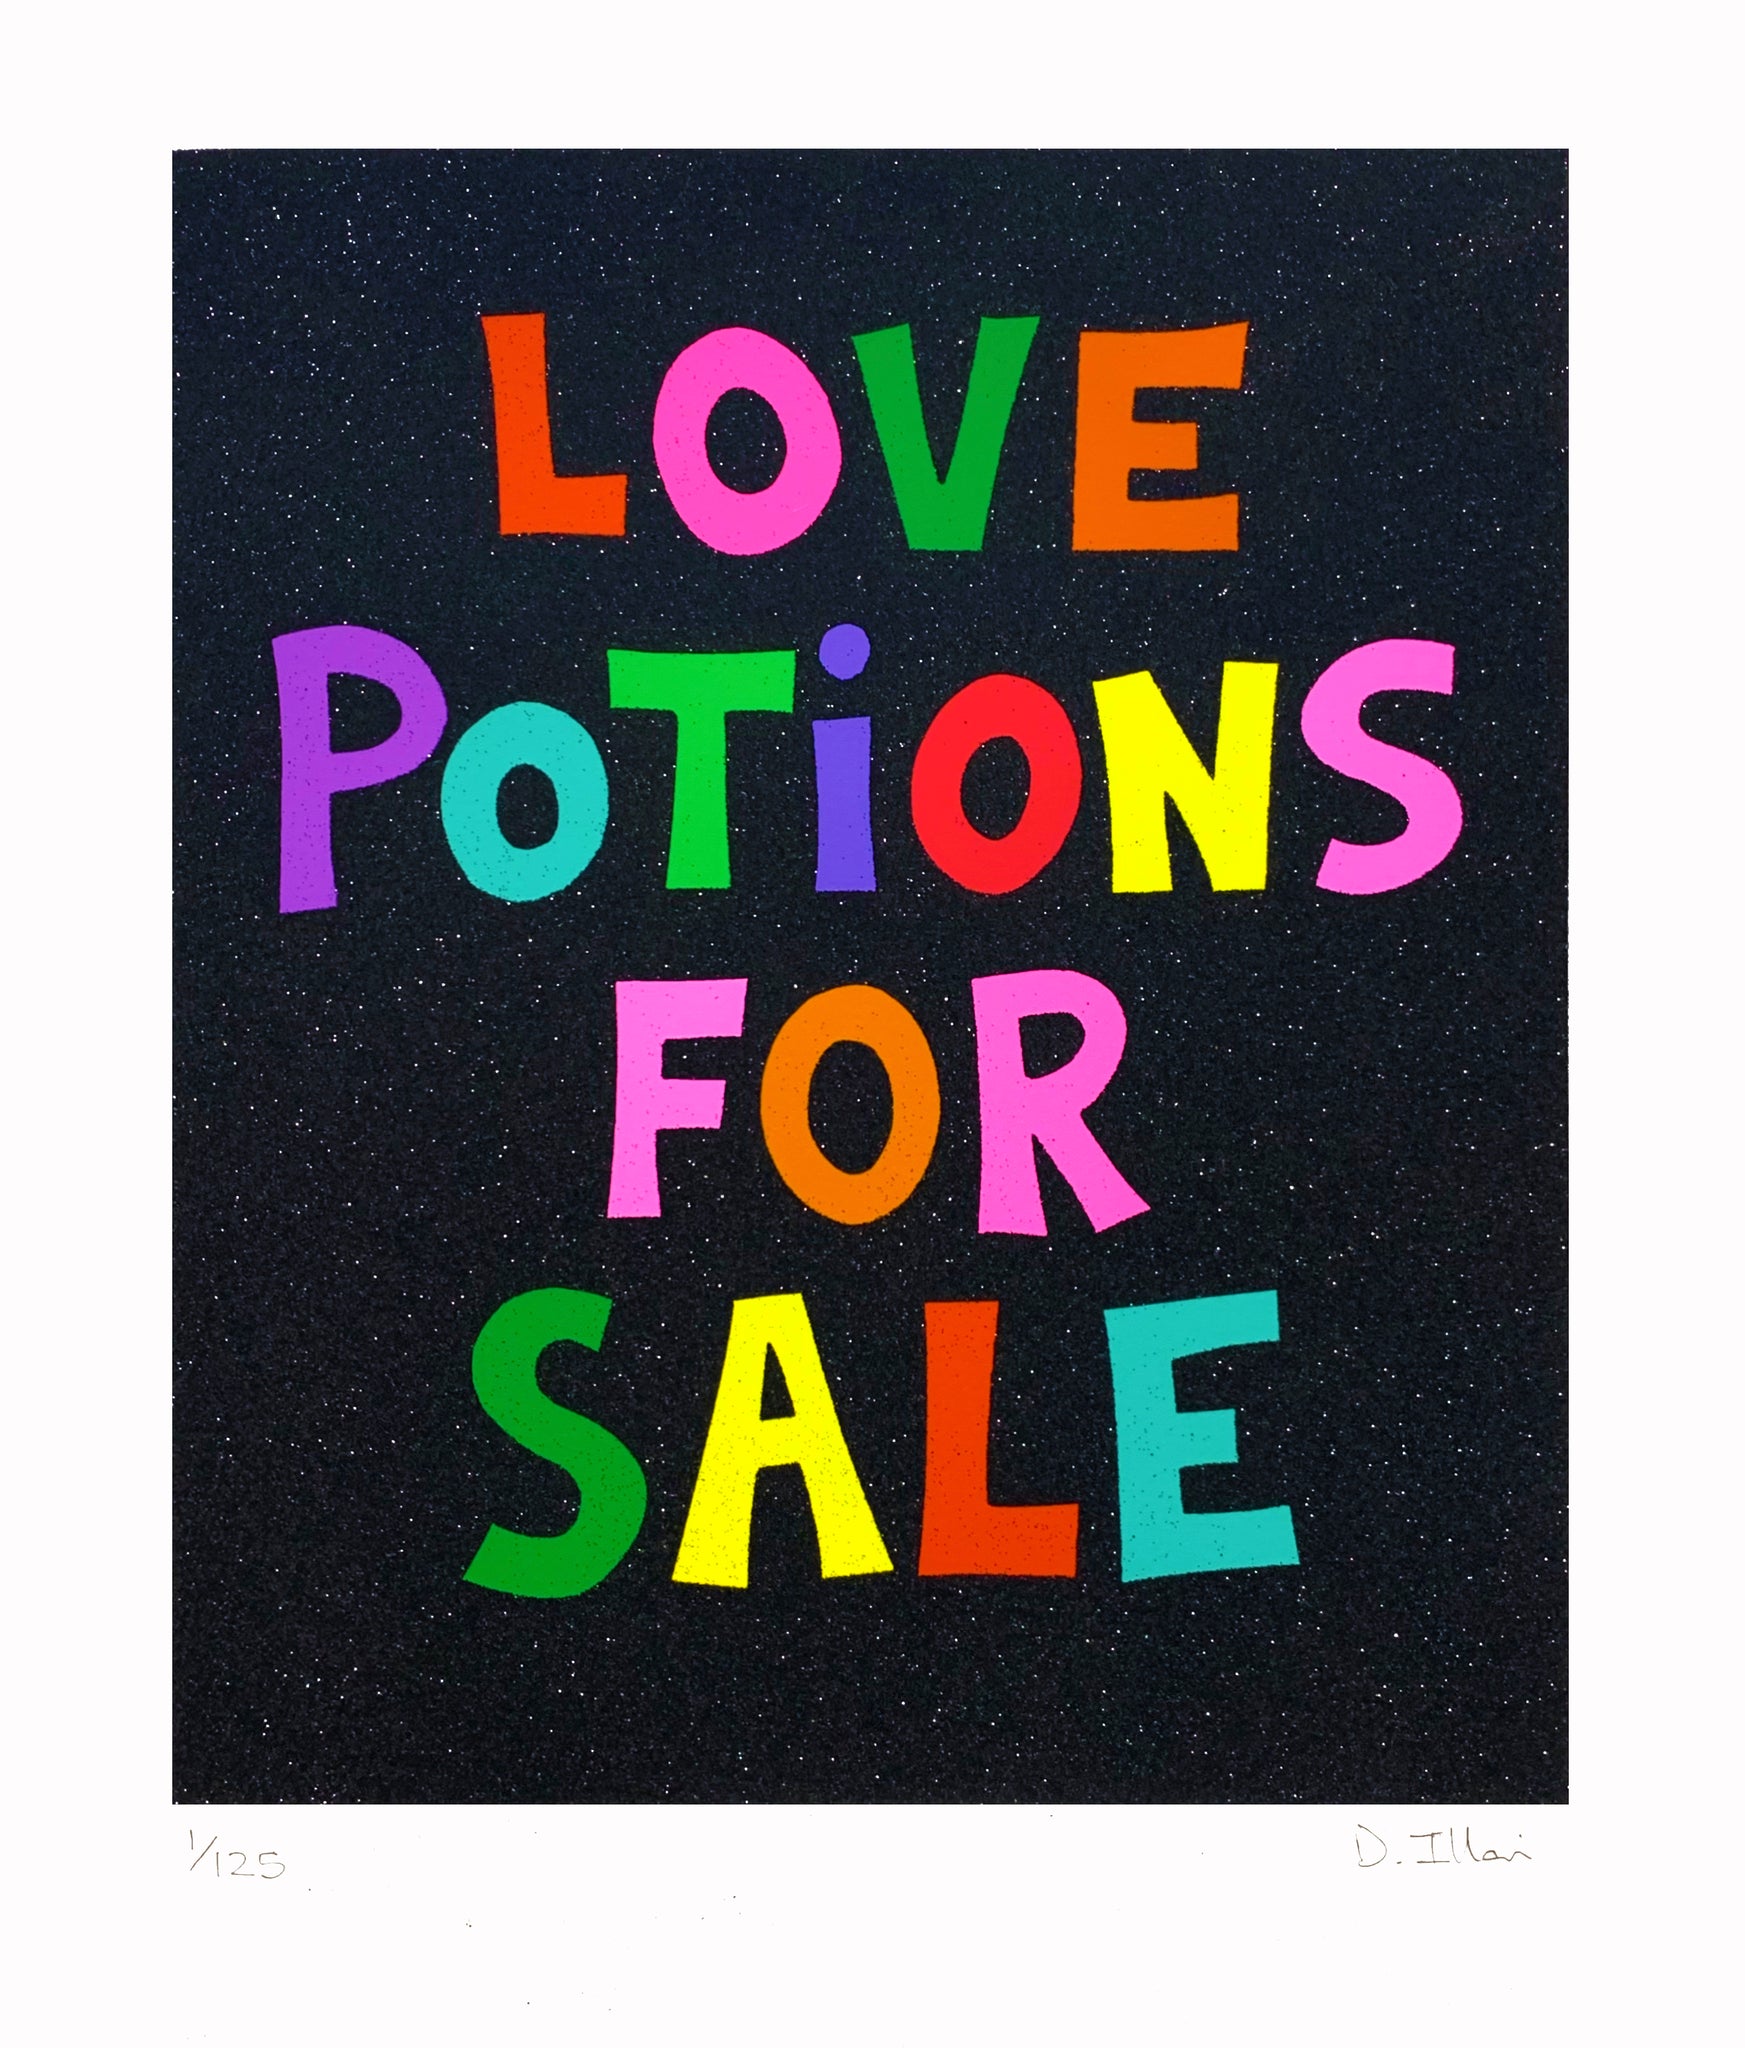 Love Potions For Sale